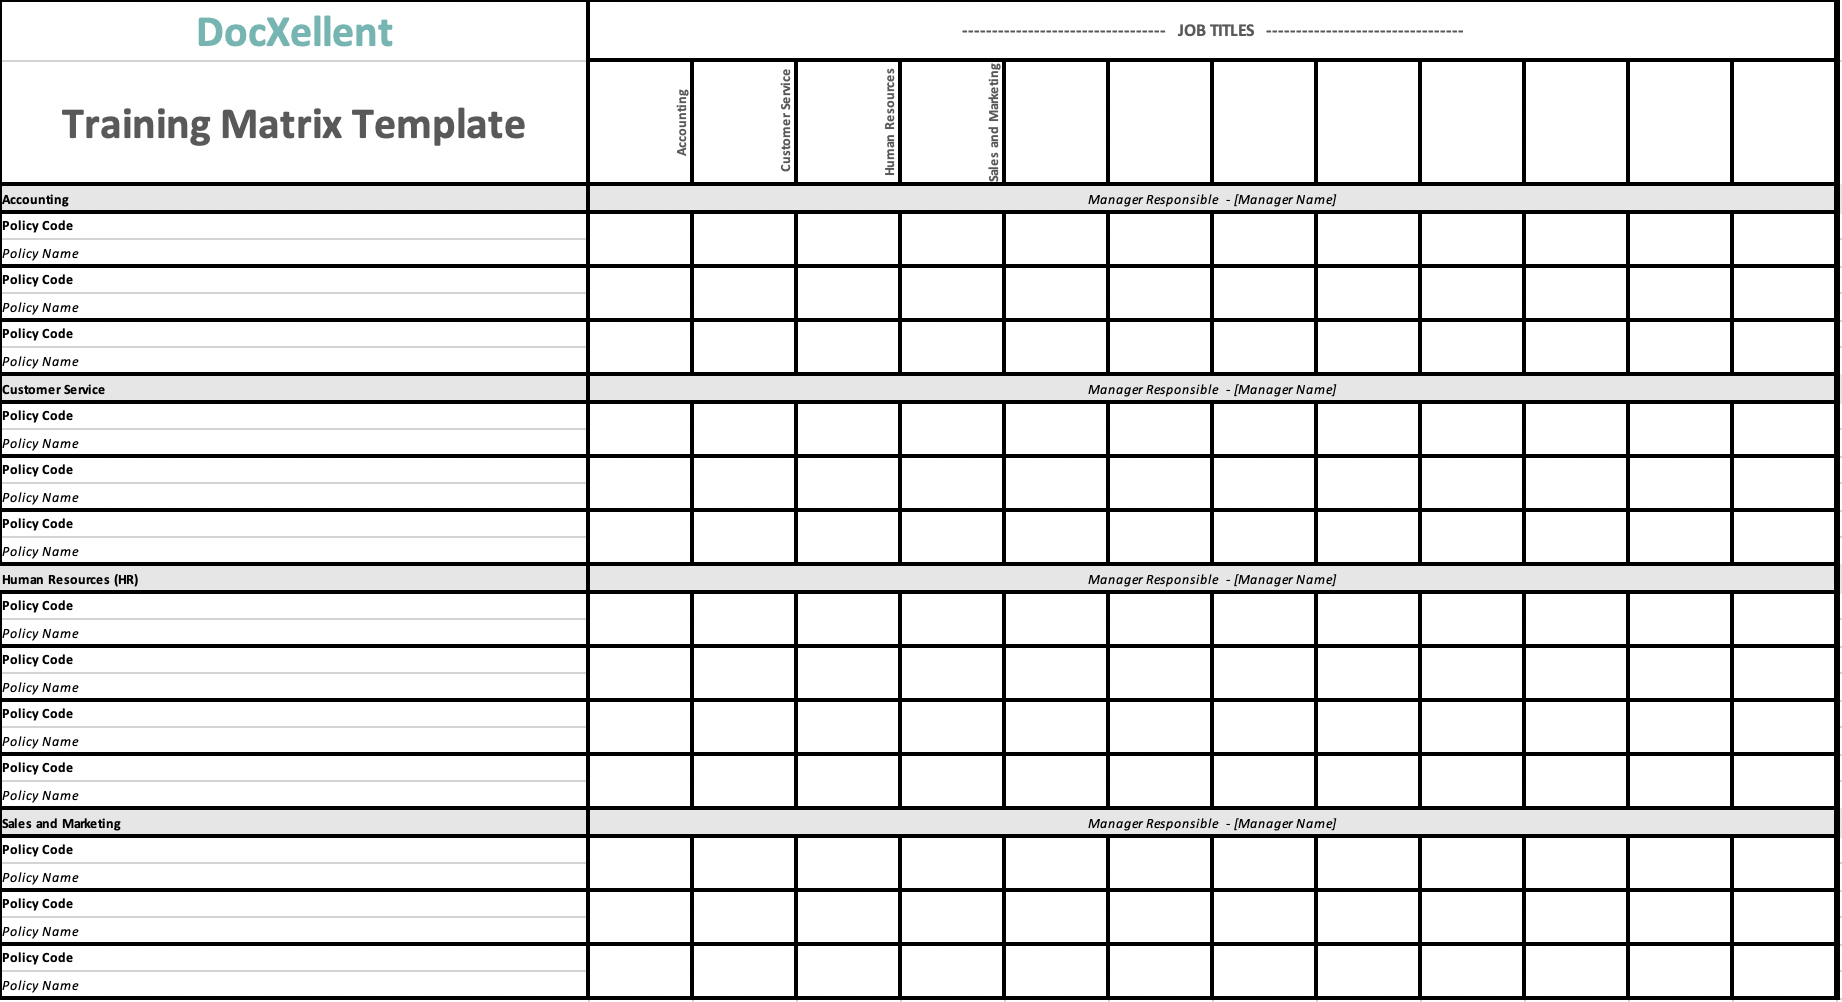 Download Our AuditorApproved Training Matrix Template